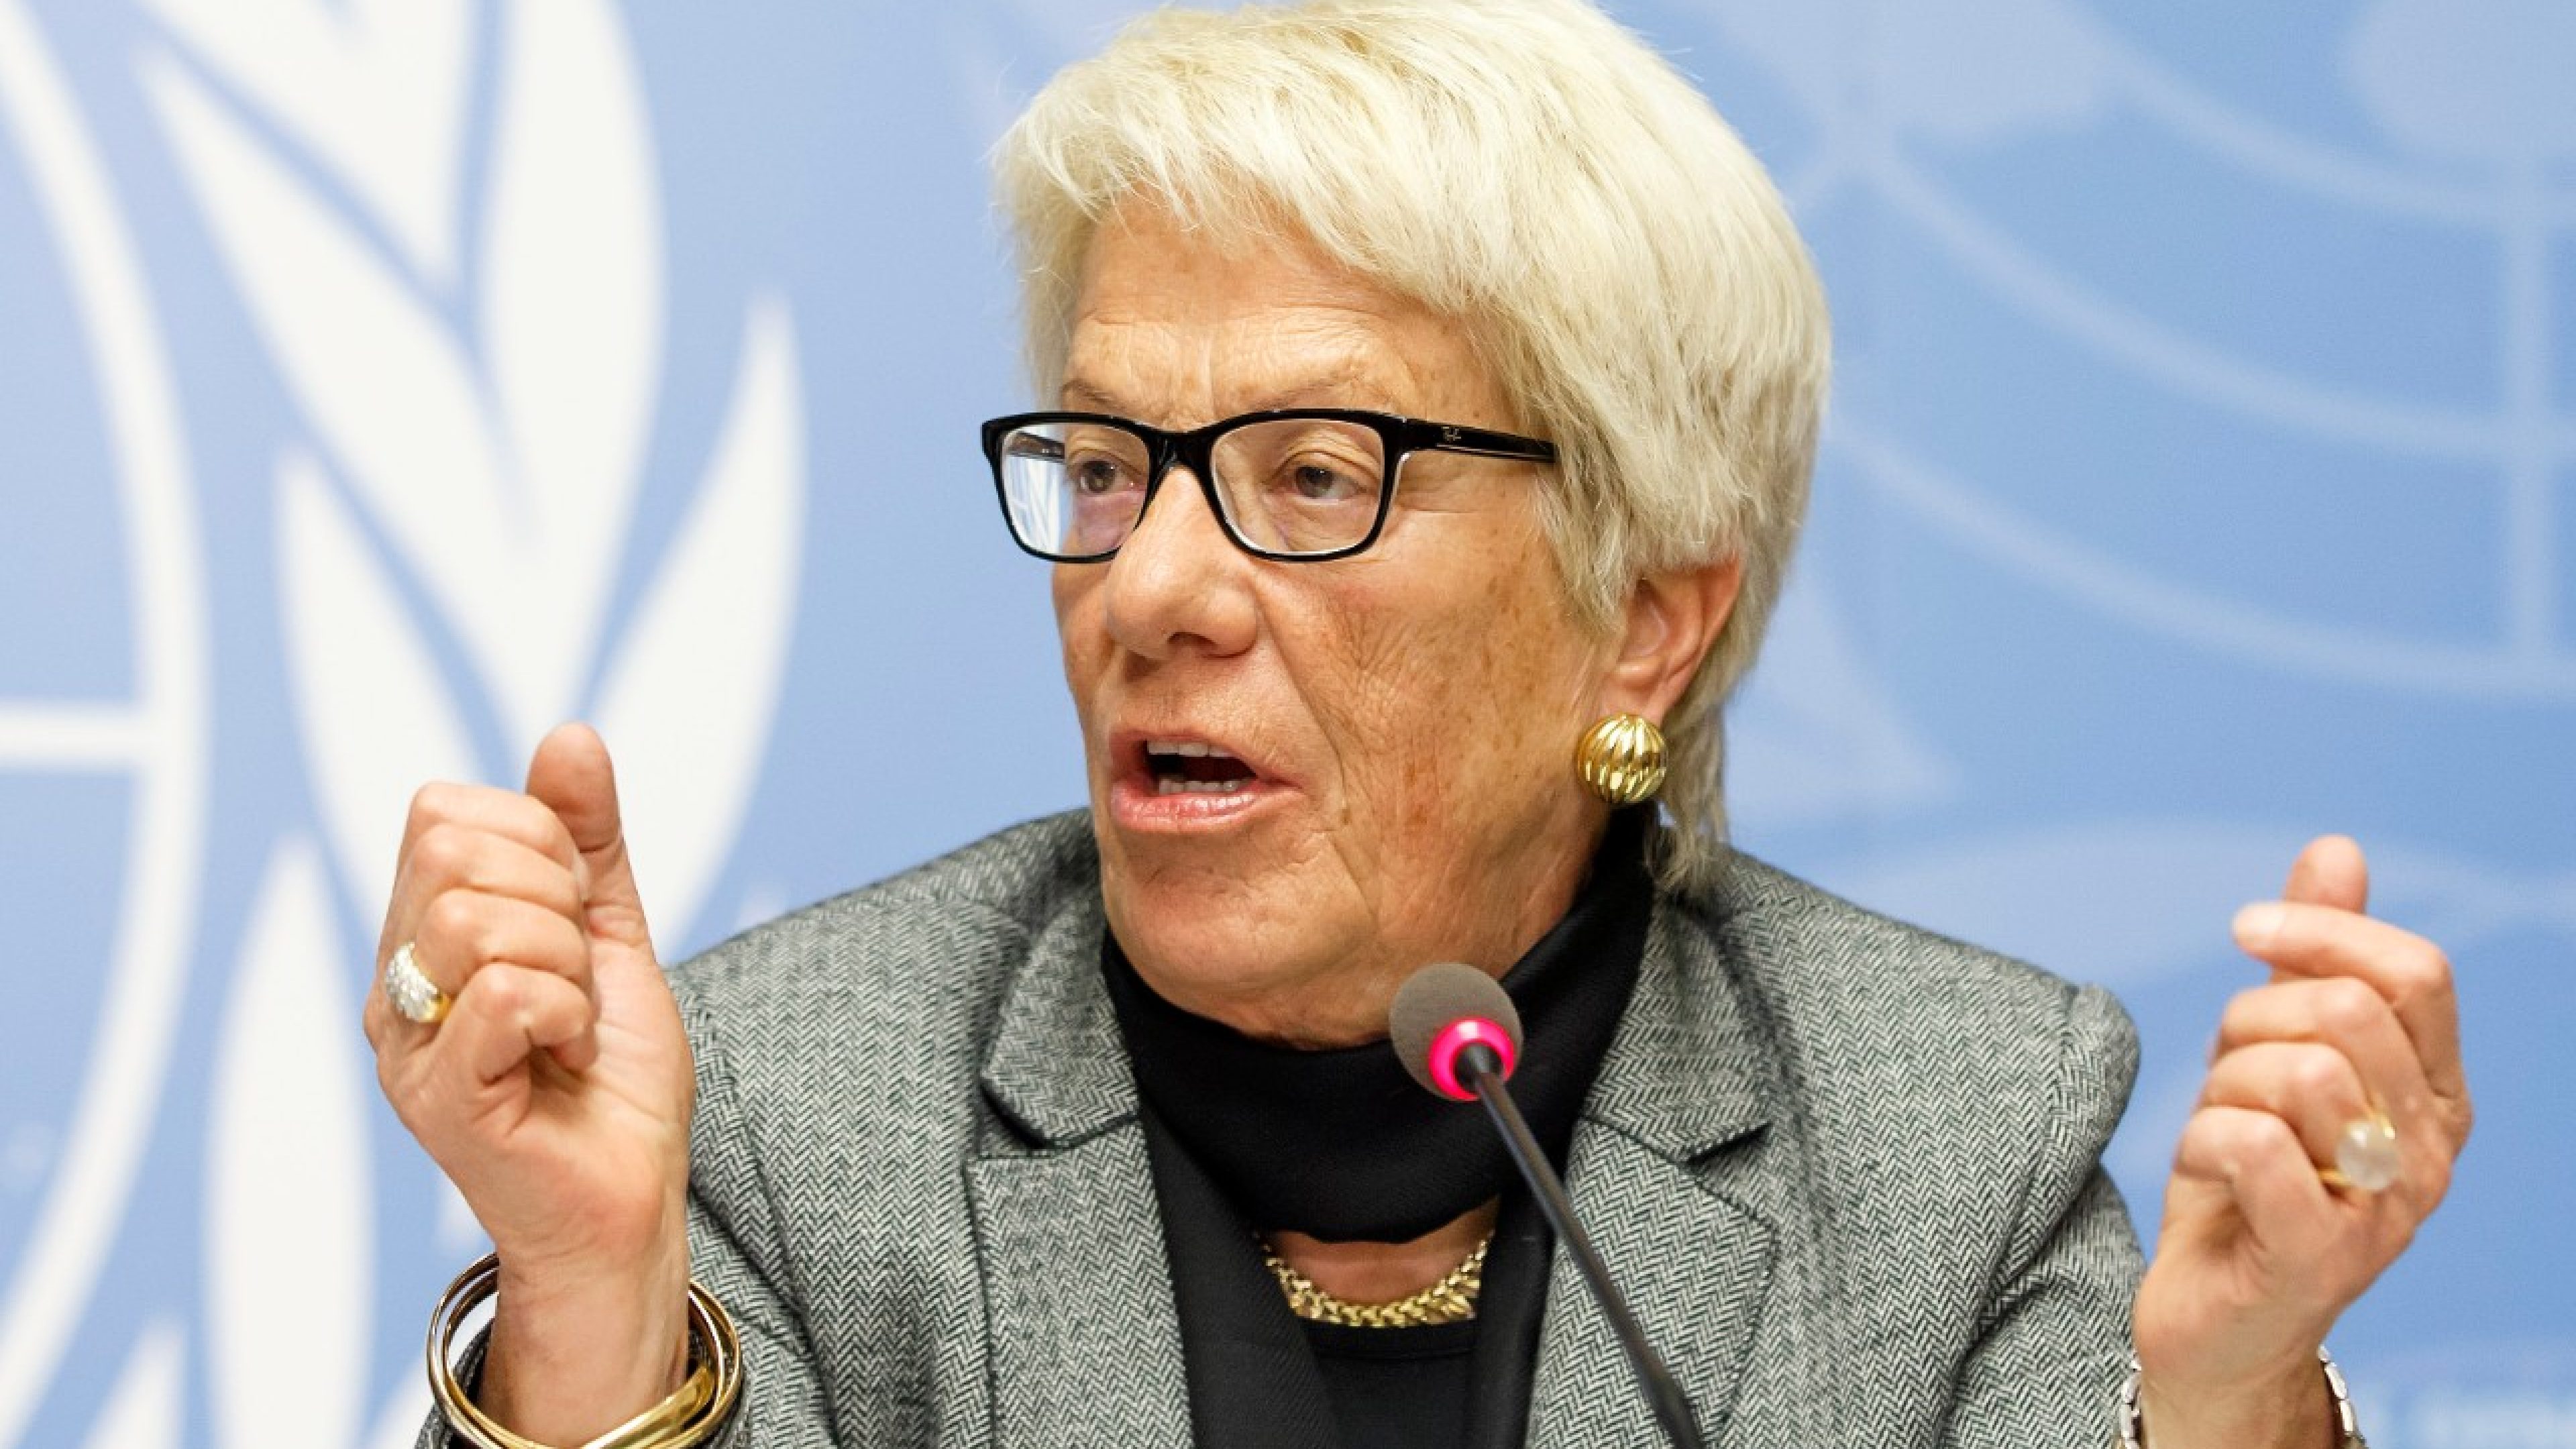 Switzerland's Carla del Ponte, member of the Commission of Inquiry on Syria, informs to the media on report "Out of Sight, Out of Mind: Deaths in Detention in the Syrian Arab Republic" of the Commission of Inquiry on the Syrian Arab Republic, during press conference, at the European headquarters of the United Nations in Geneva, Switzerland, Monday, February 8, 2016. (KEYSTONE/Salvatore Di Nolfi)